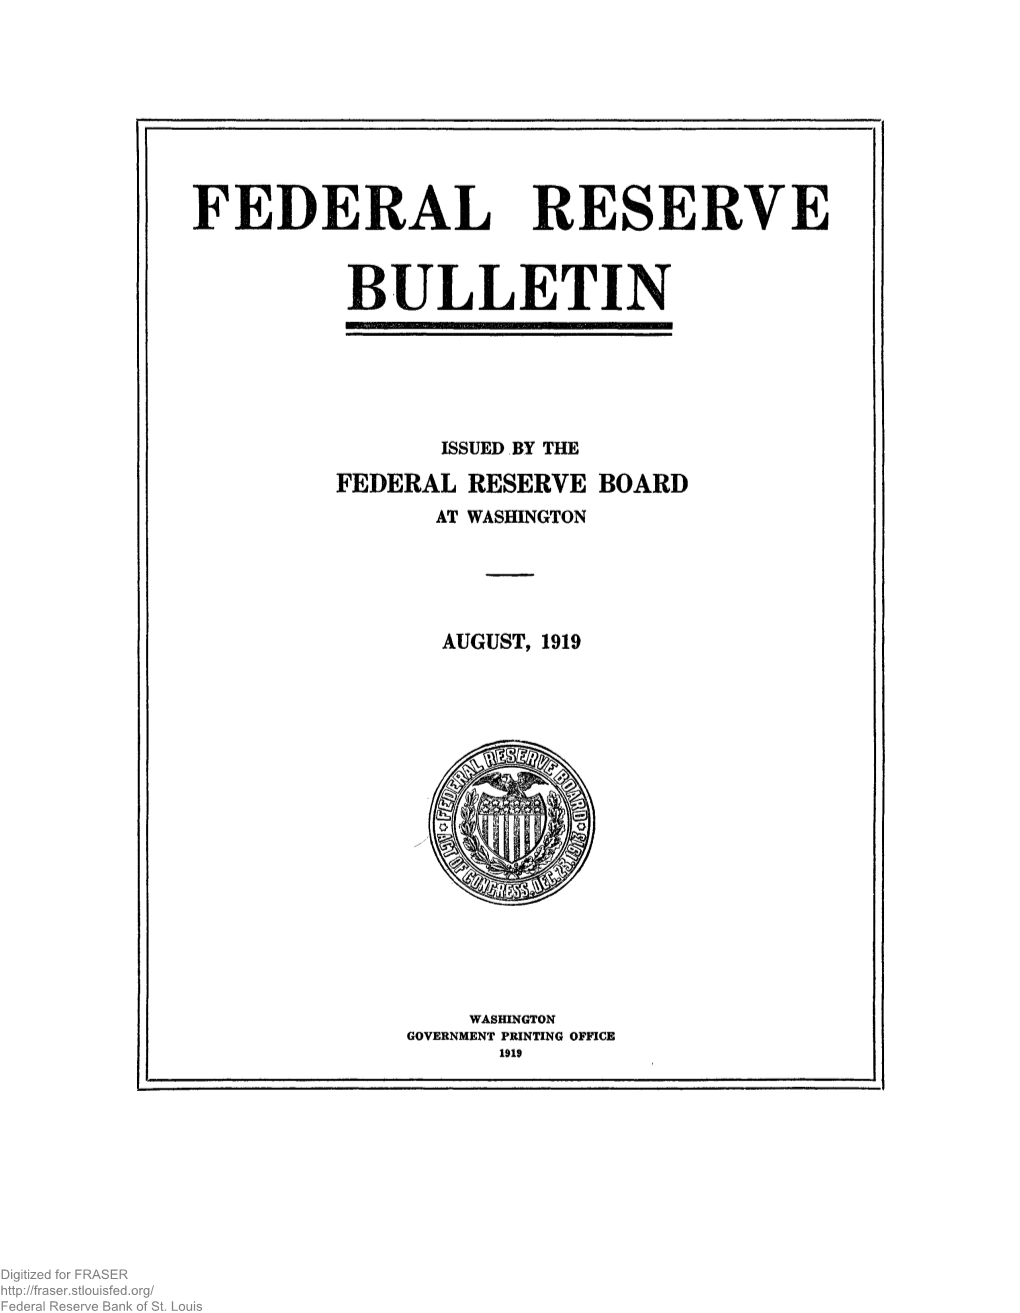 Federal Reserve Bulletin August 1919